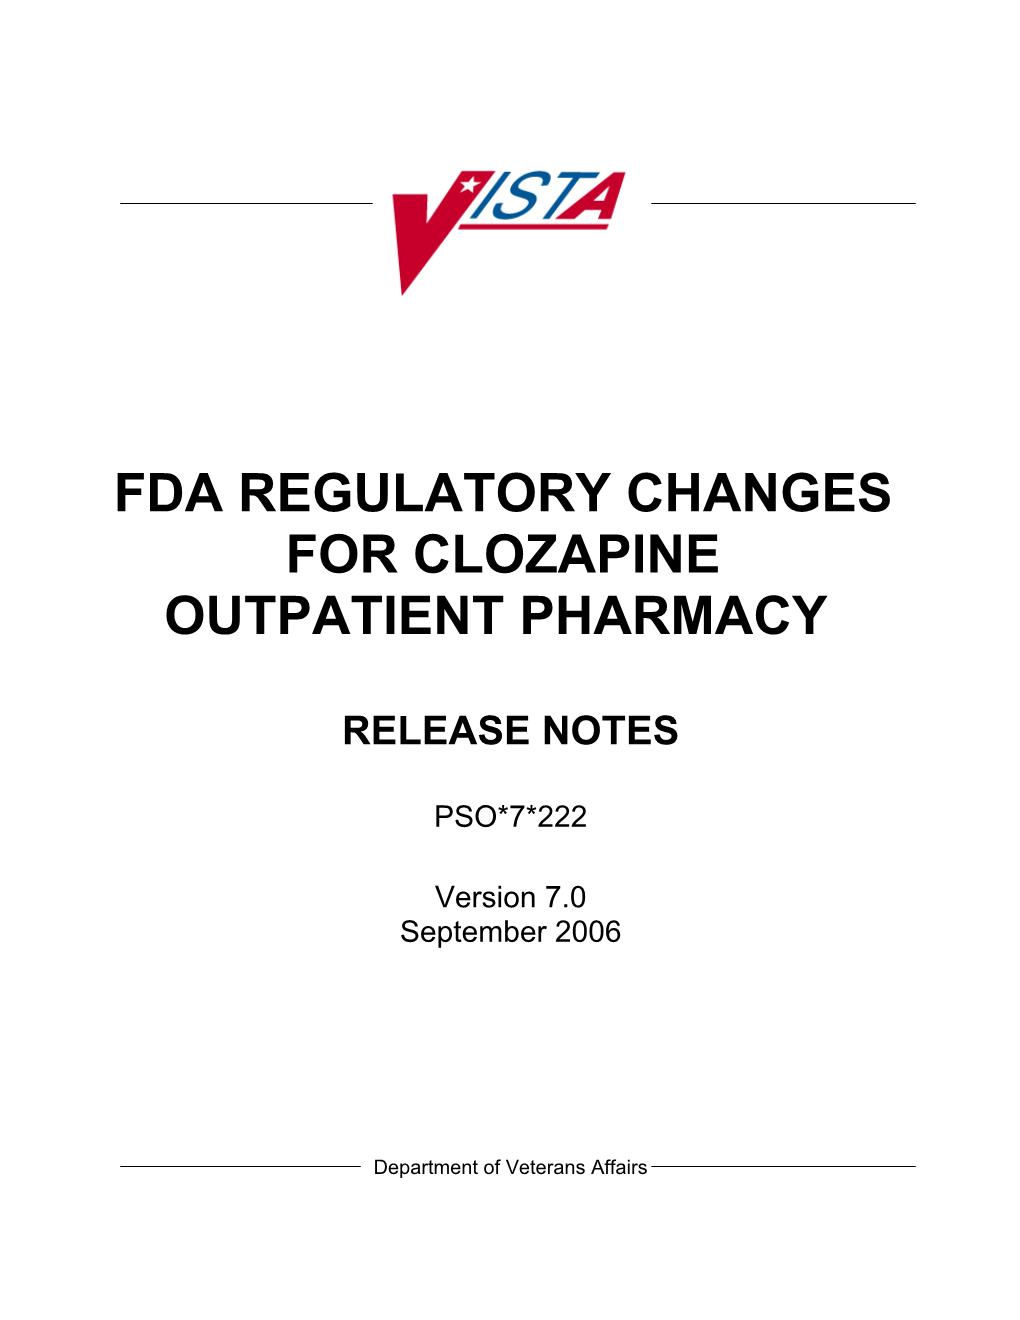 FDA Regulatory Changes For Clozapine Release Notes